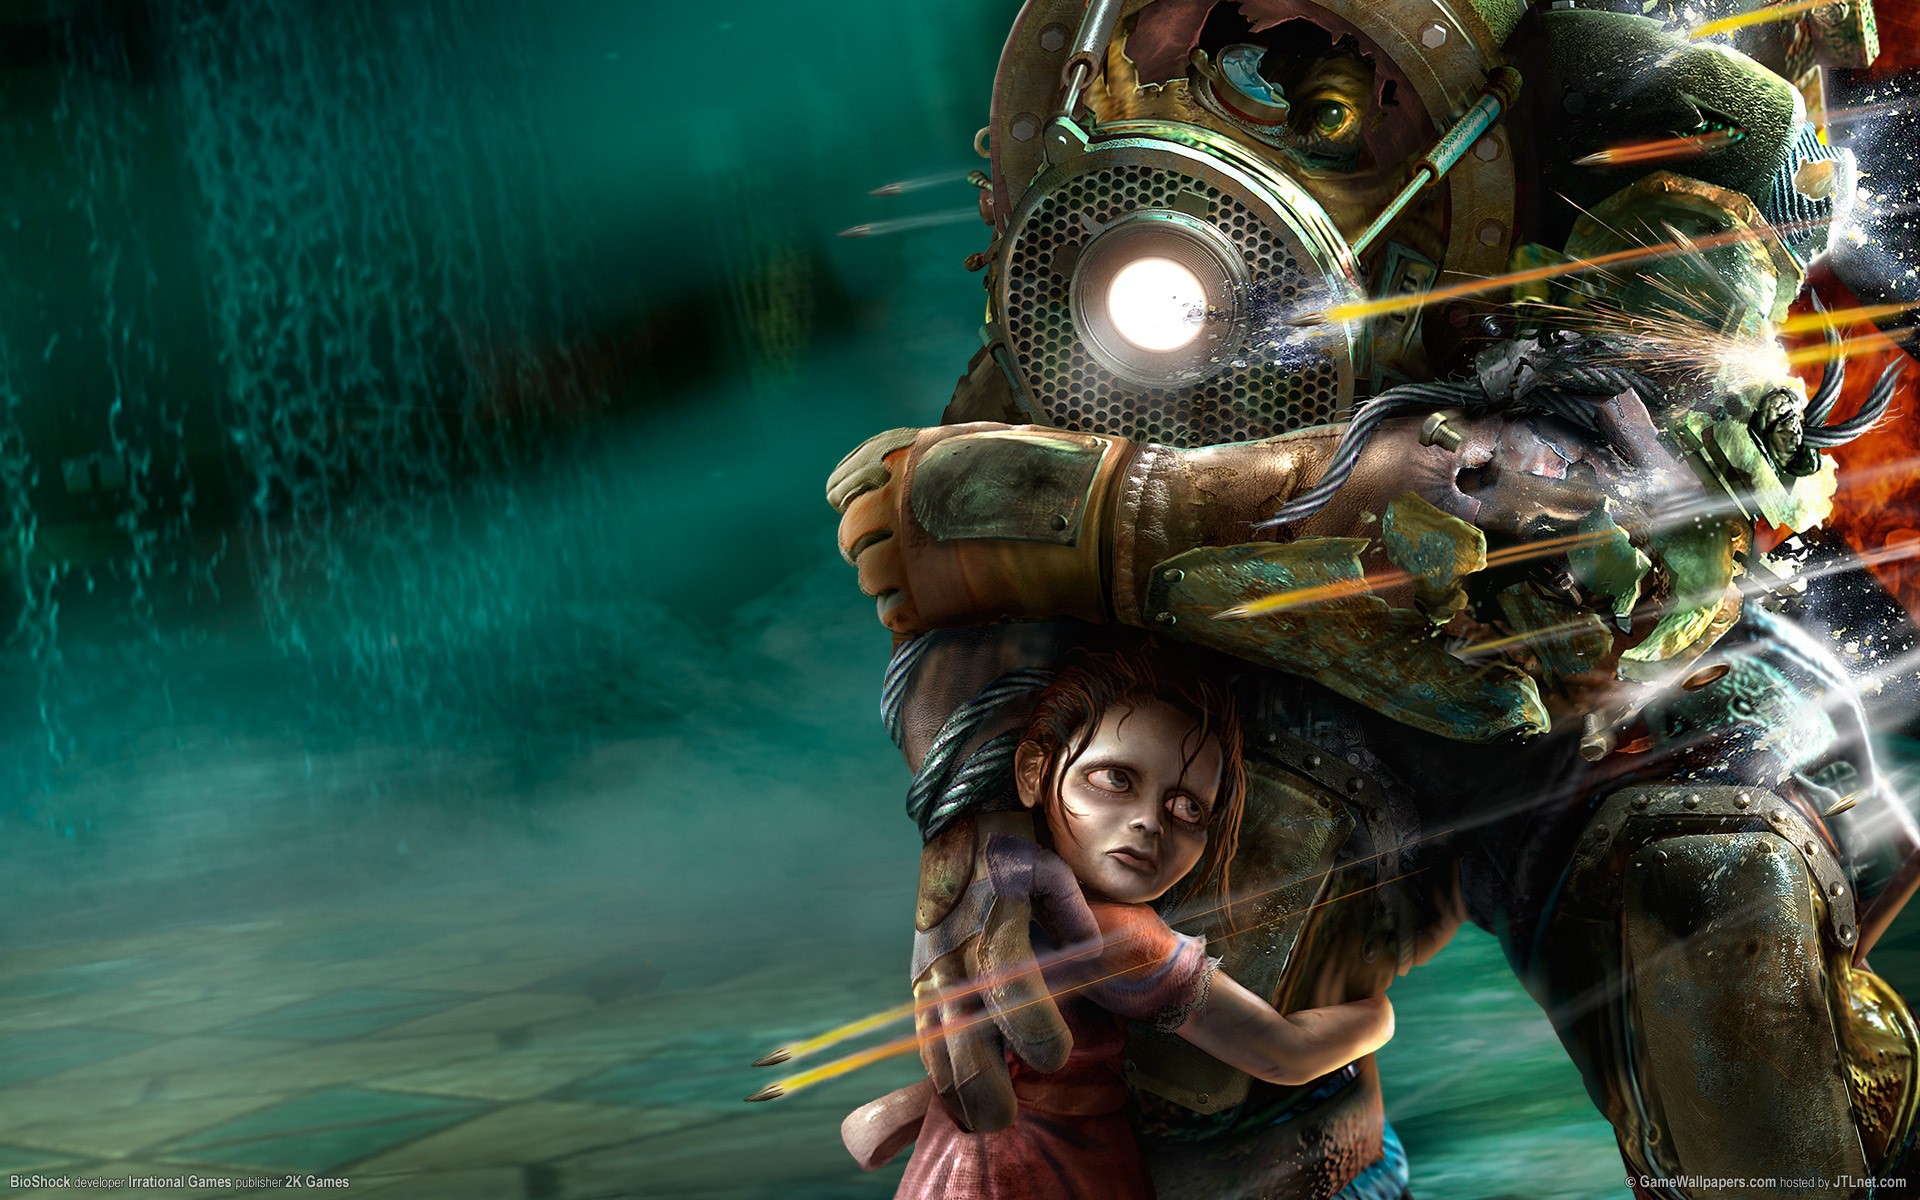 General 1920x1200 BioShock Big Daddy Little Sister video games PC gaming video game art 2K Games Irrational Games